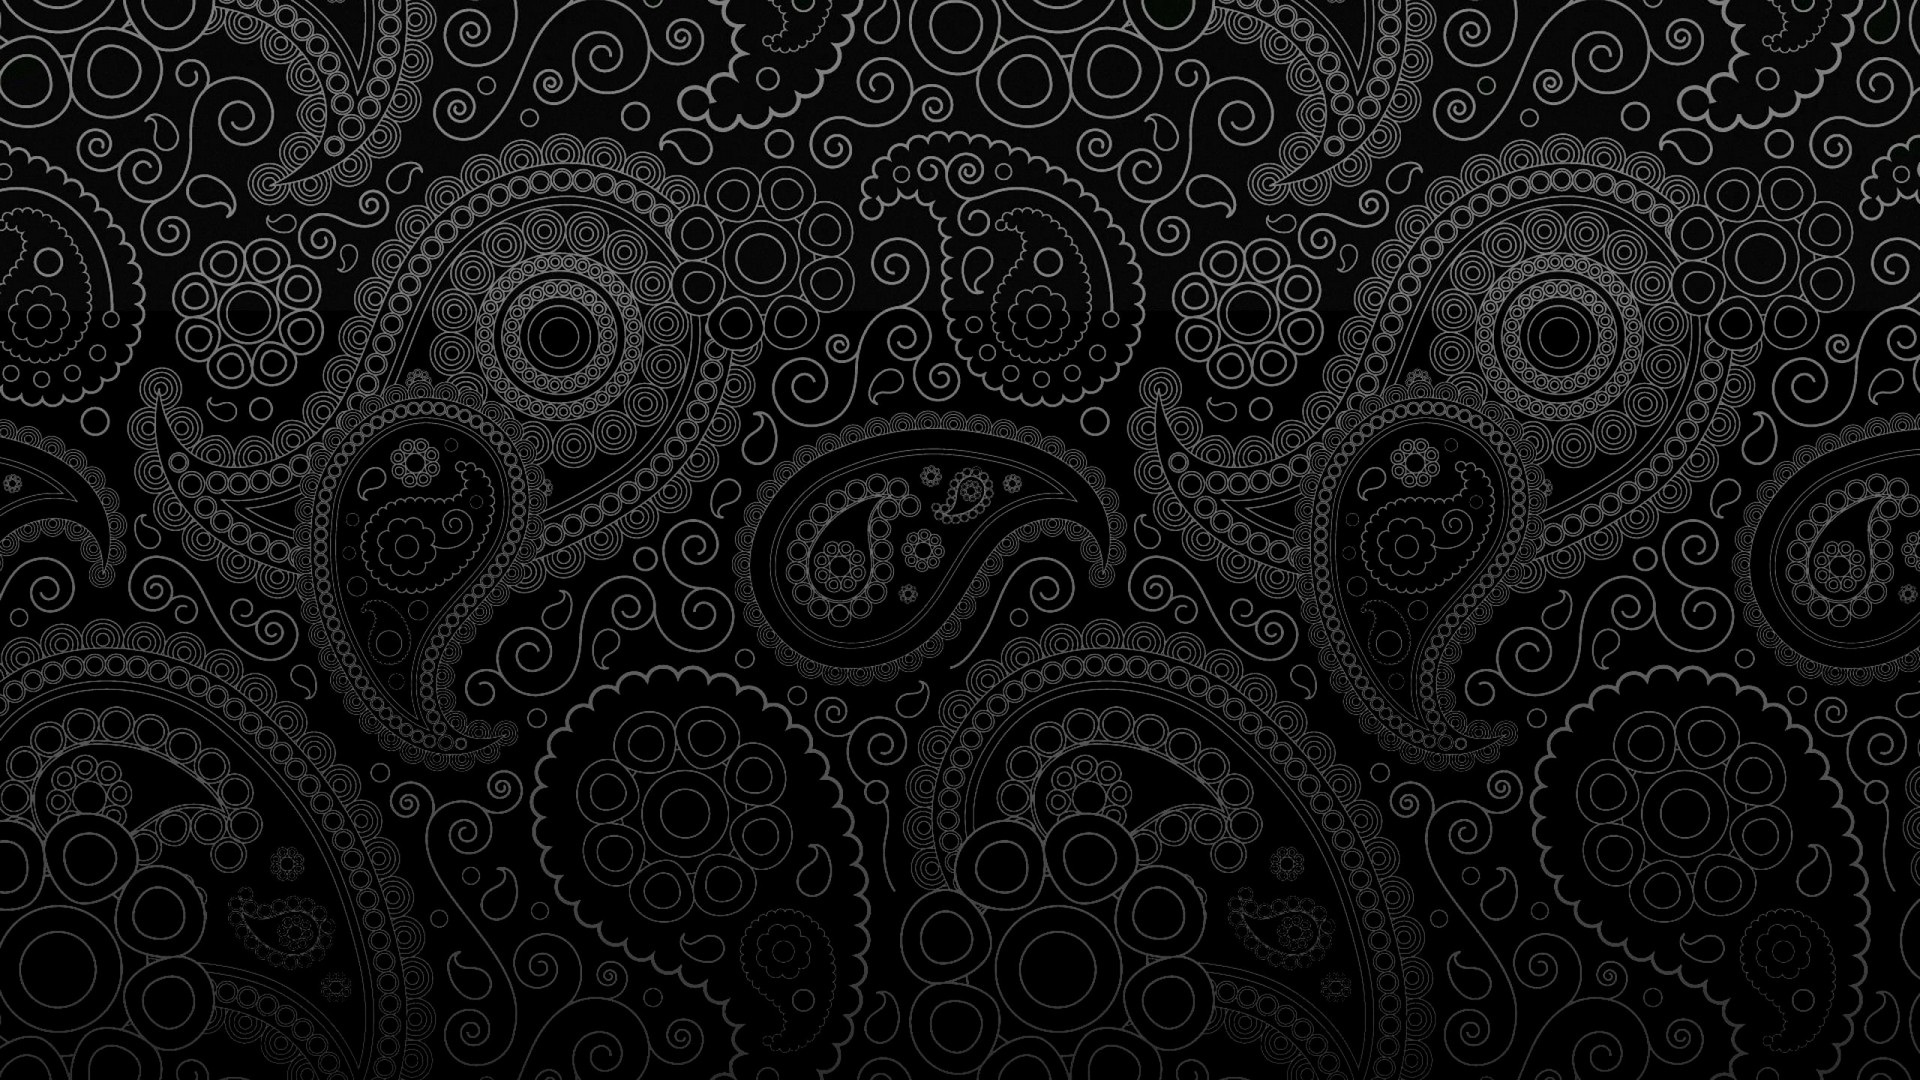 Wallpaper All Black Desktop with high-resolution 1920x1080 pixel. You can use this wallpaper for your Windows and Mac OS computers as well as your Android and iPhone smartphones